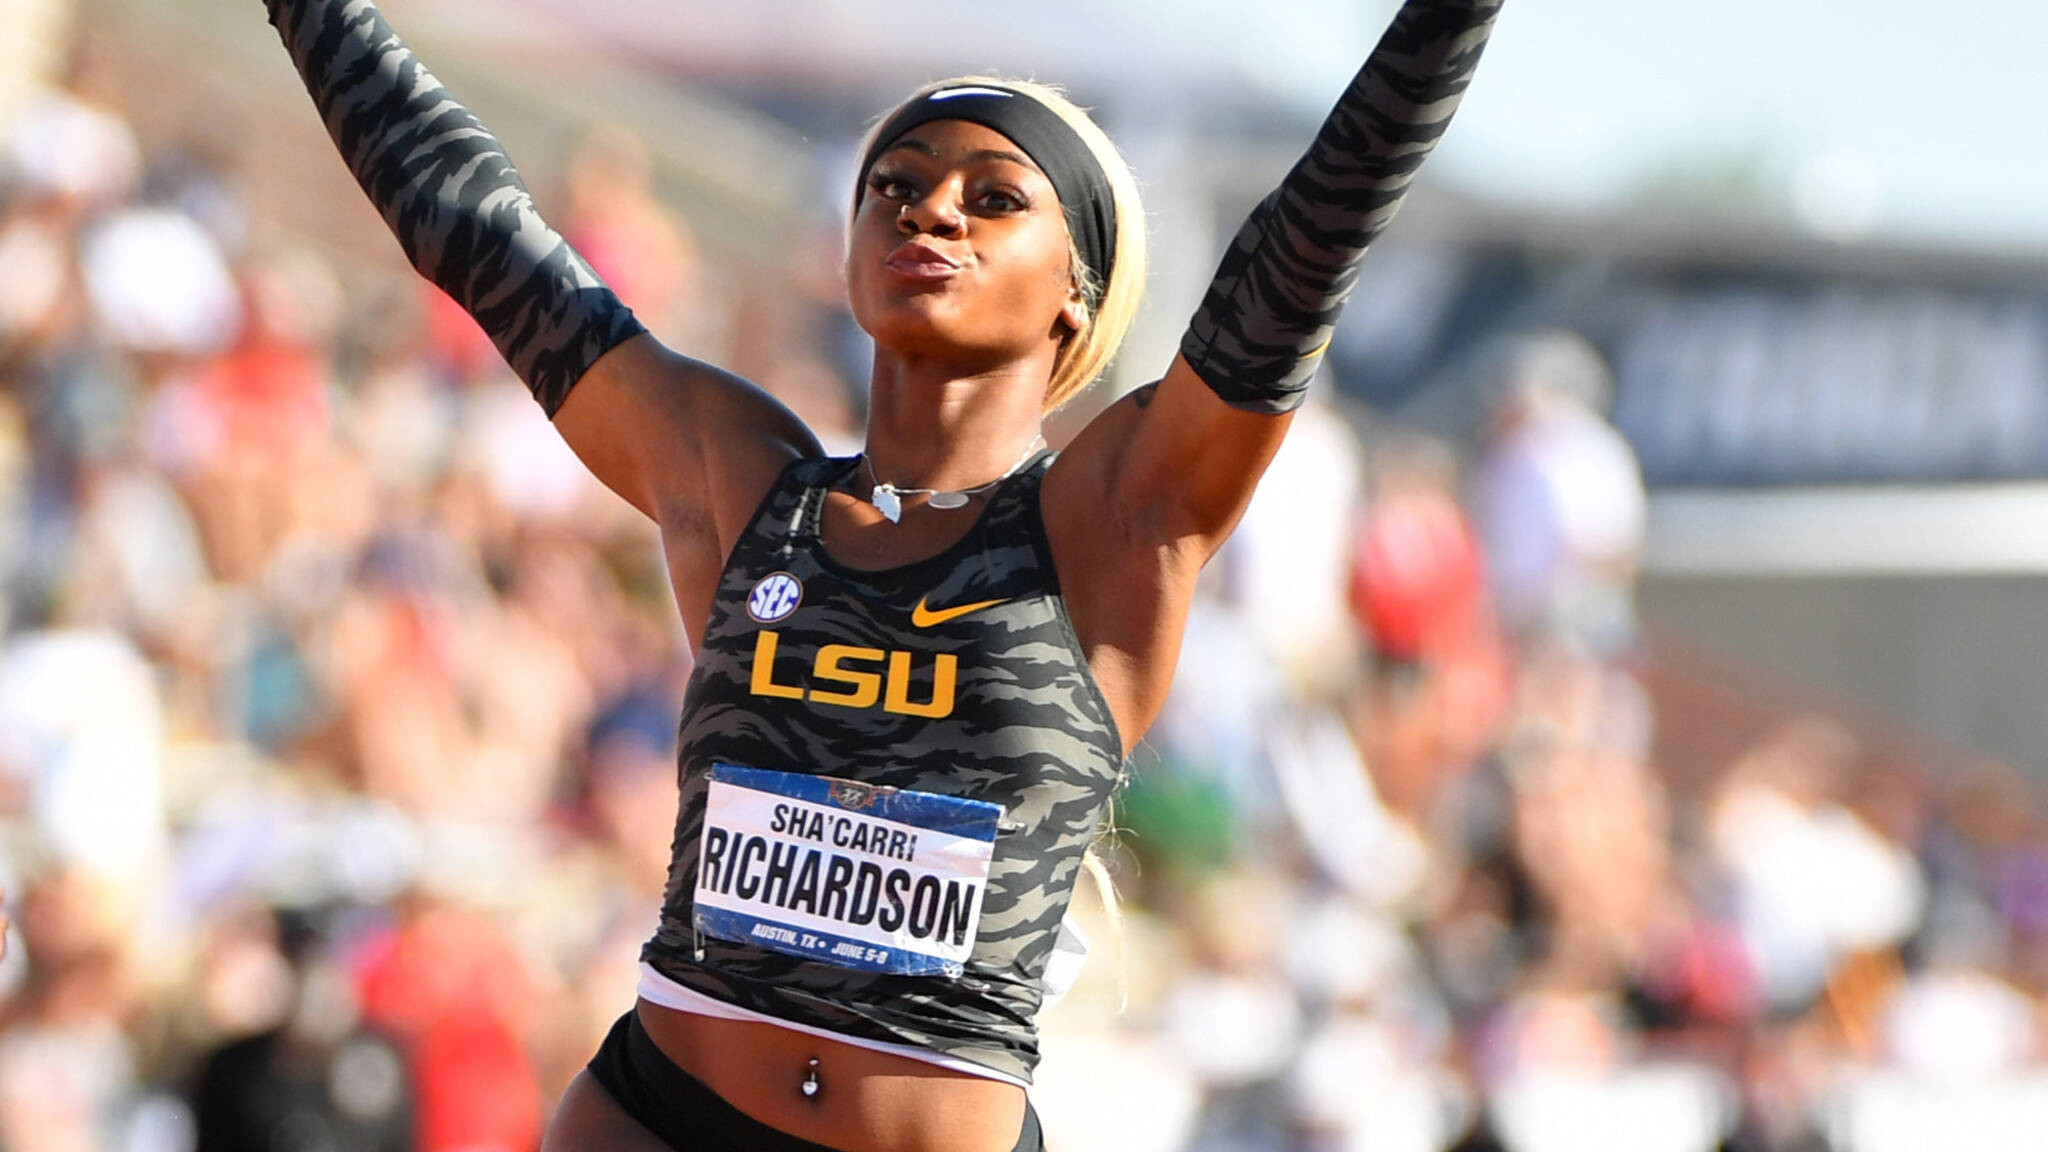 It is hoped the Collegiate Advisory Council established by the USOPC will help promising NCAA athletes like Sha'Carri Richardson make the transition from university competition to Olympic-level standard ©Getty Images